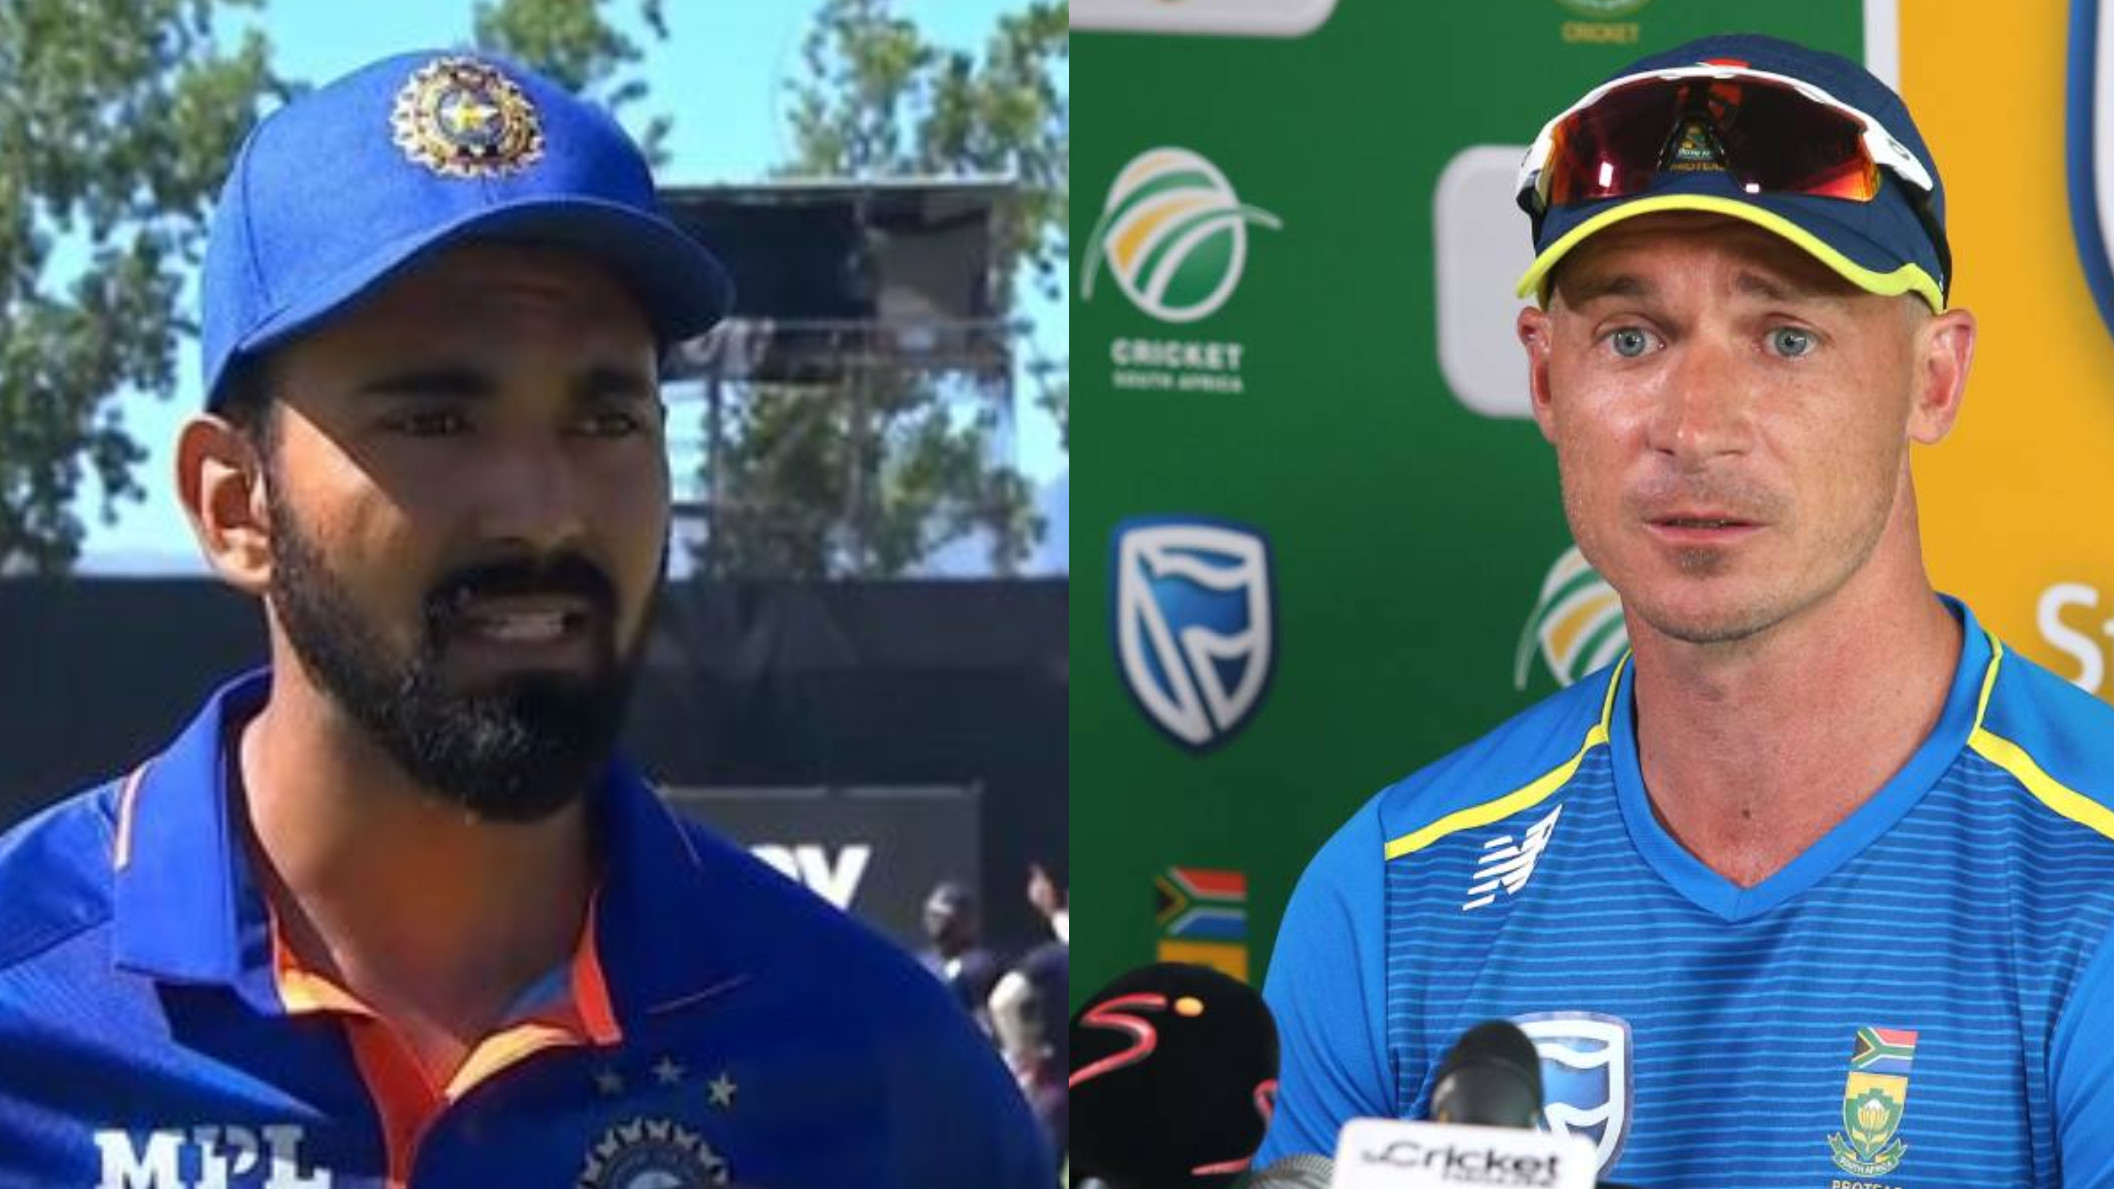 SA v IND 2021-22: “He’s got only 24 hours to turn it around”: Steyn opines on KL Rahul’s captaincy